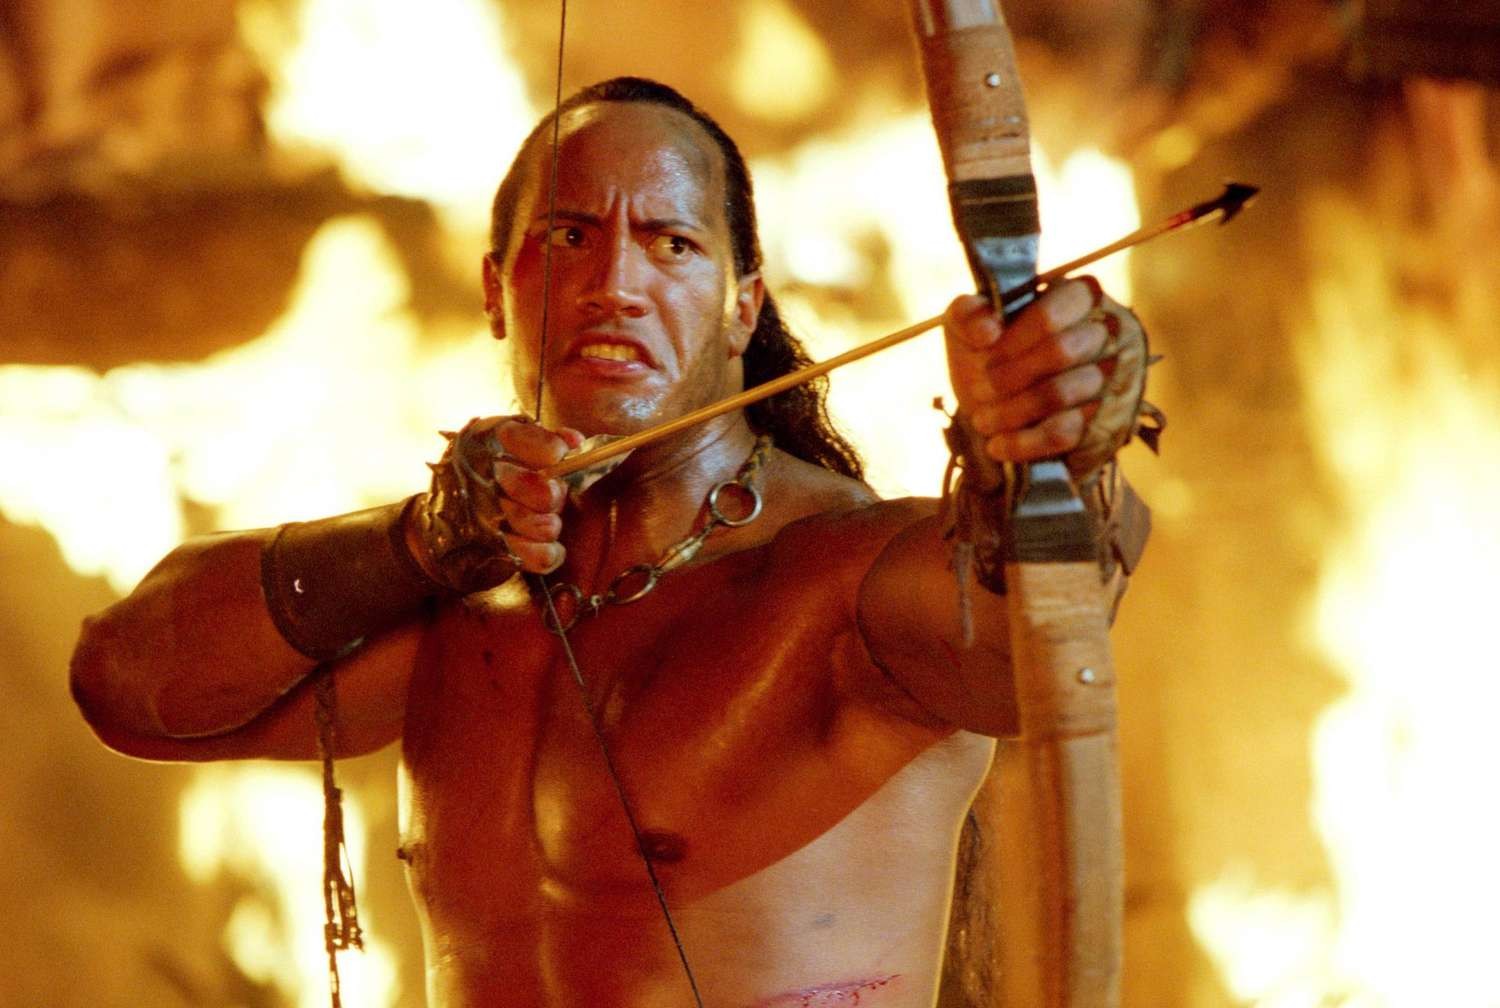 Dwayne Johnson in a scene from The Scorpion King